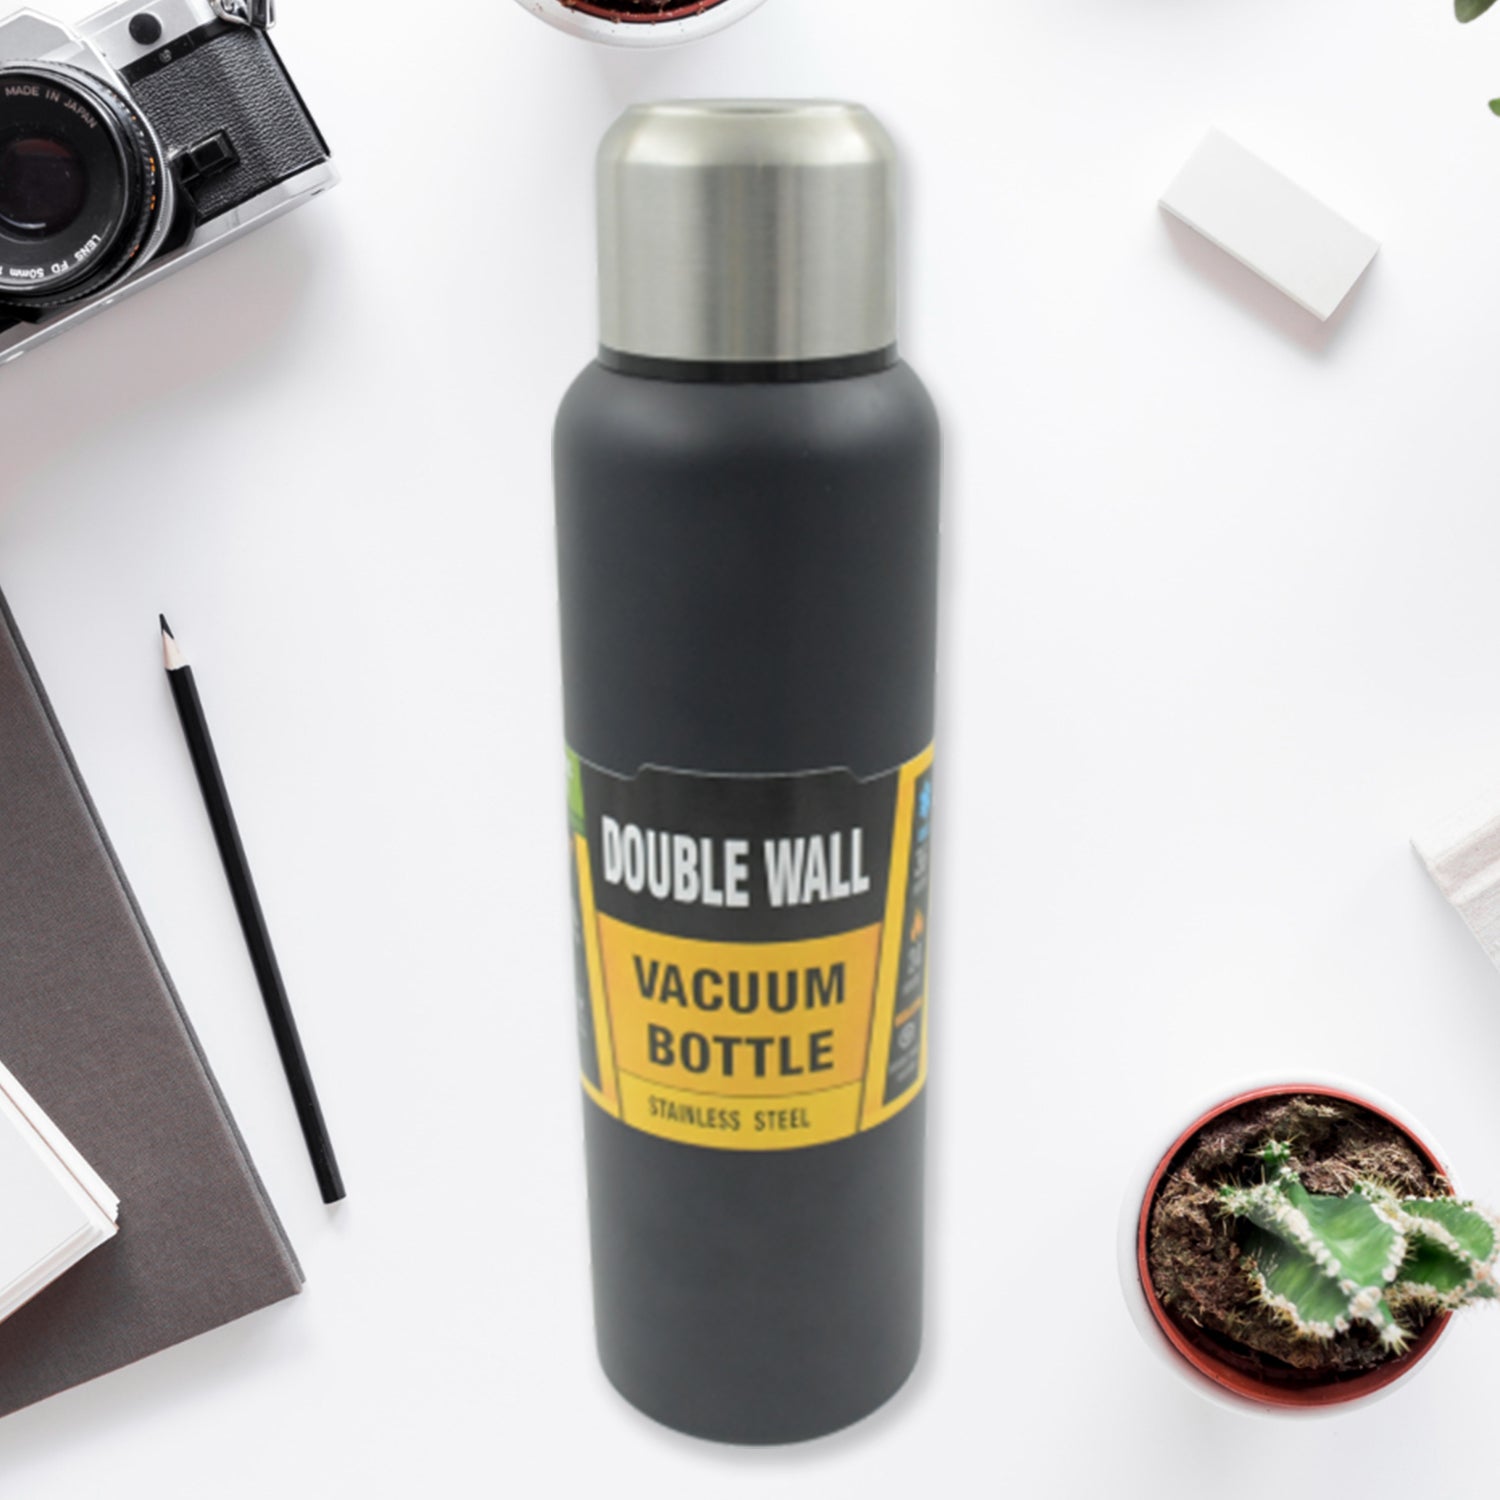 0334 304 Stainless Steel Vacuum Flask Water Bottle, Double Wall, Fridge Water Bottle, Leak Proof, Rust Proof, Hot & Cold Drinks, Gym BPA Free Camping for Sports, Outdoors Travel Home, For office/Gym/School (1500 ML)